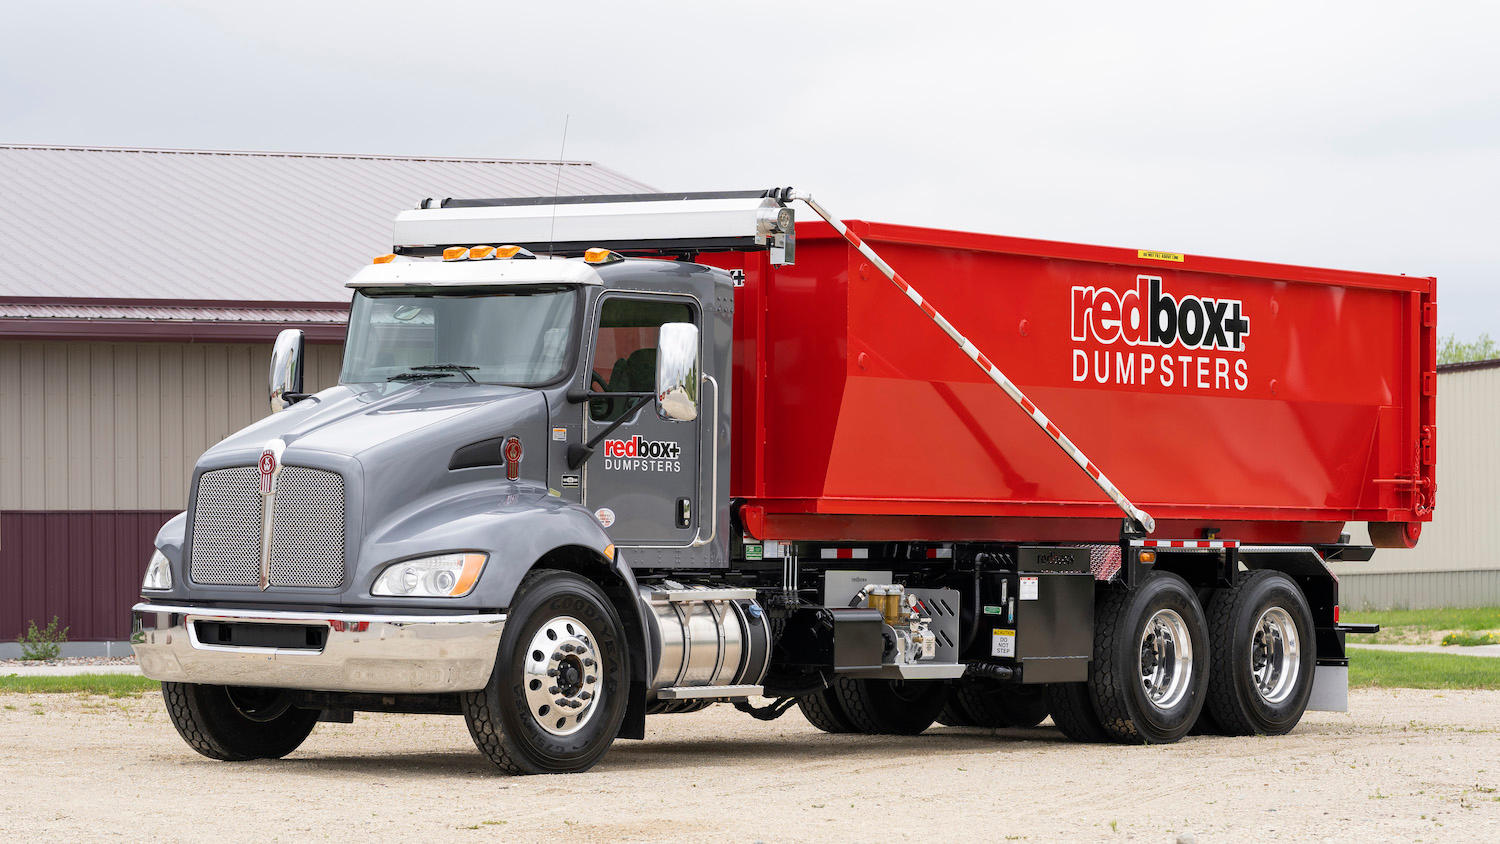 Dumpster rental service in the NW Arkansas area